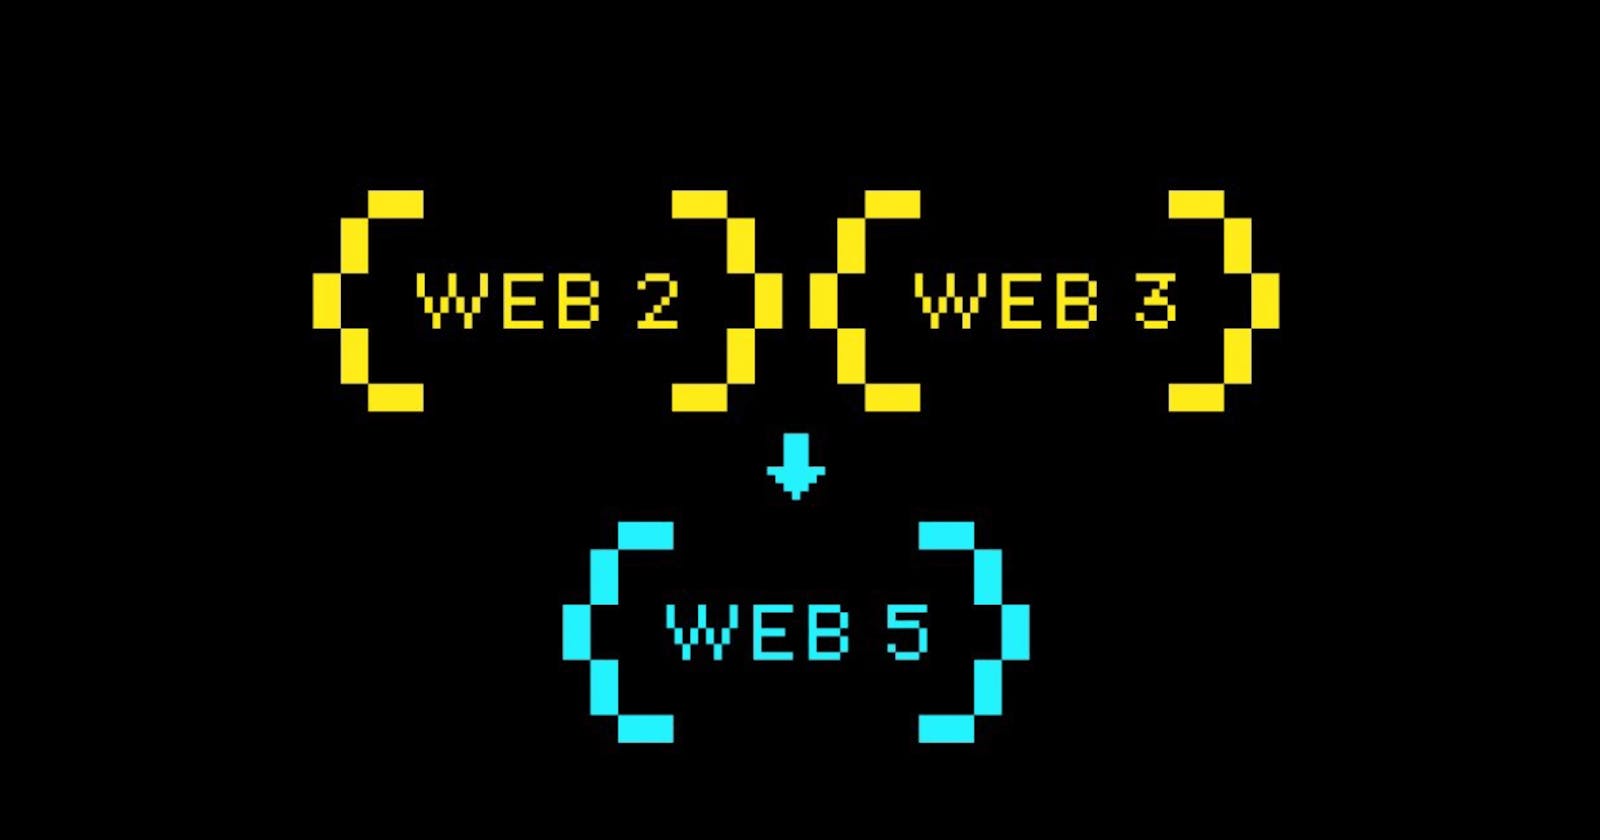 Web5: A Glimpse into the Next Frontier of the Internet